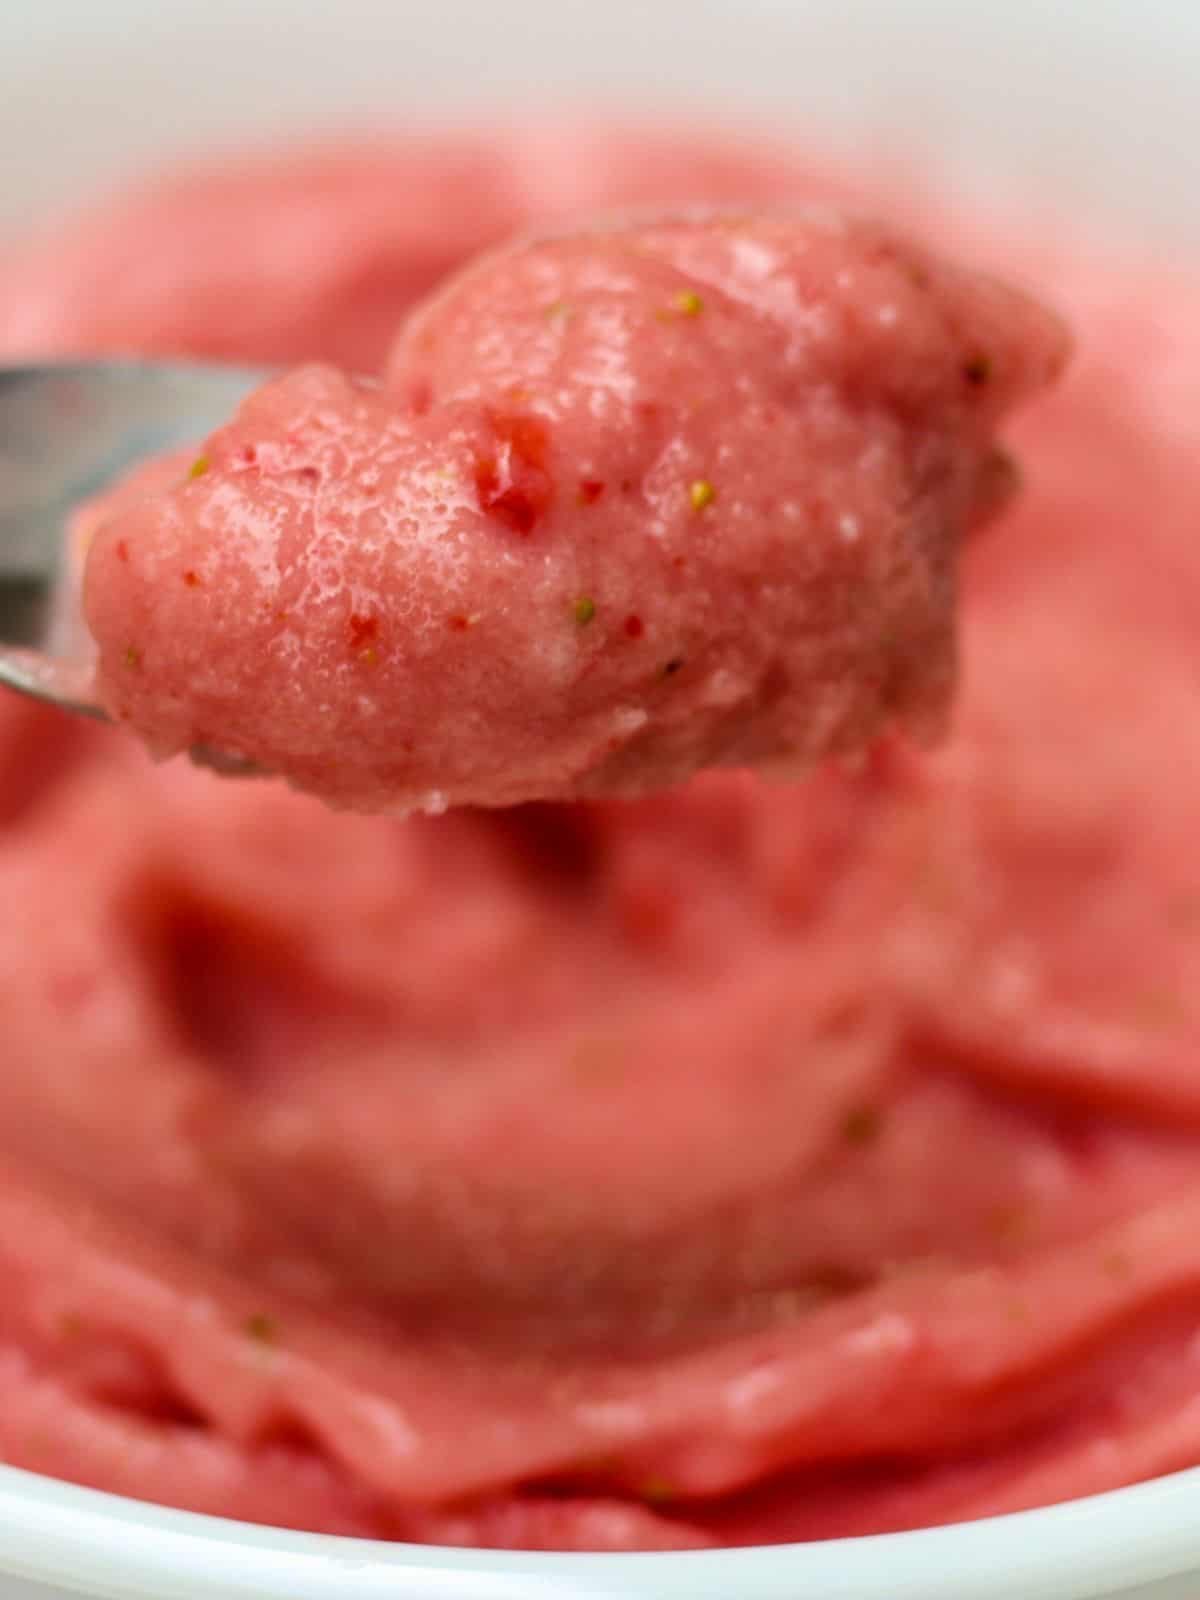 A close up shot of a spoon with some pink smoothie.